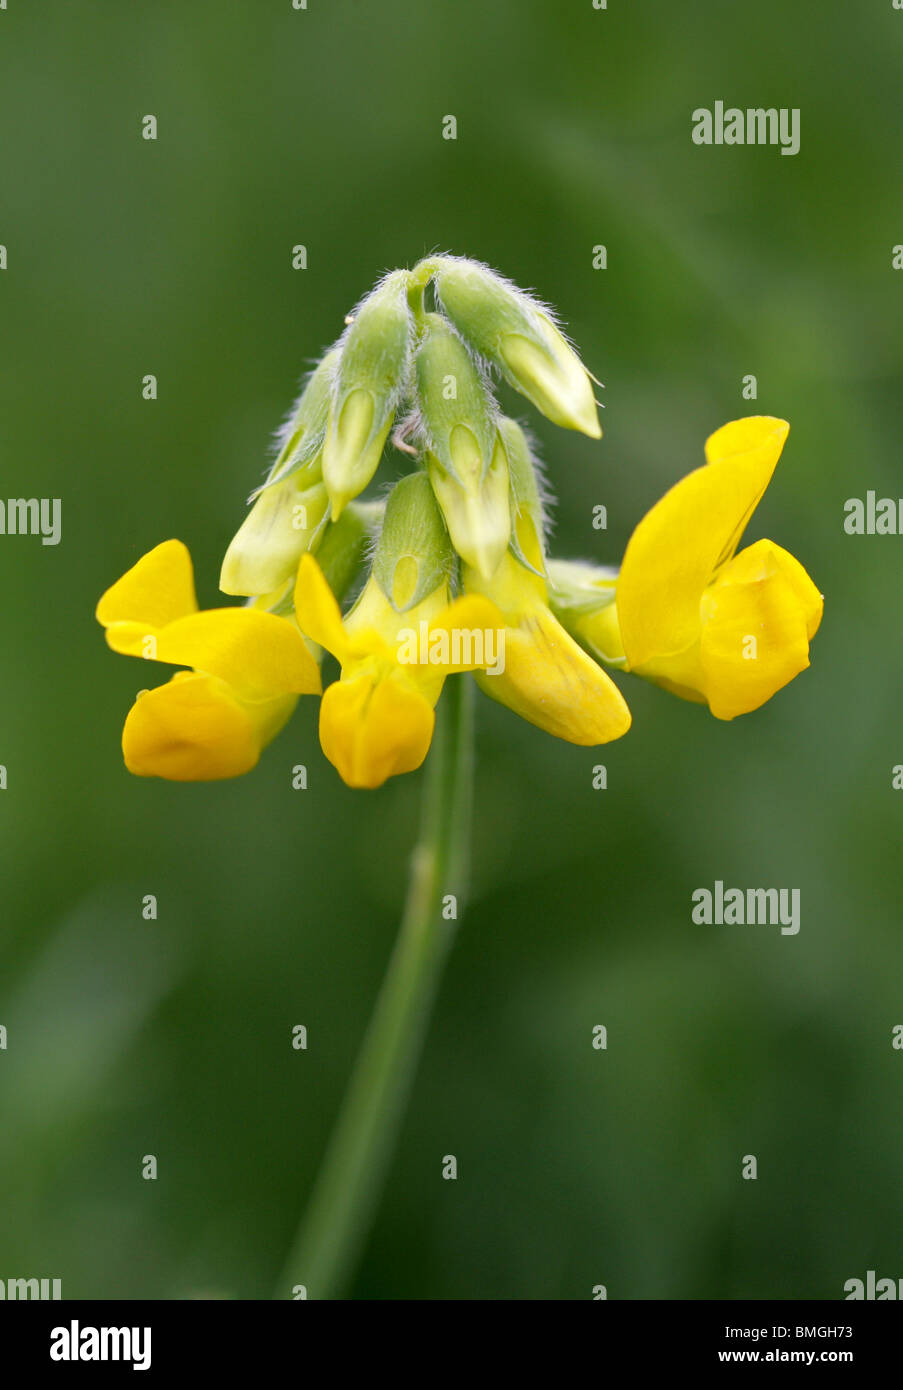 Meadow Vetchling, Lathyrus pratensis, Fabaceae Stock Photo